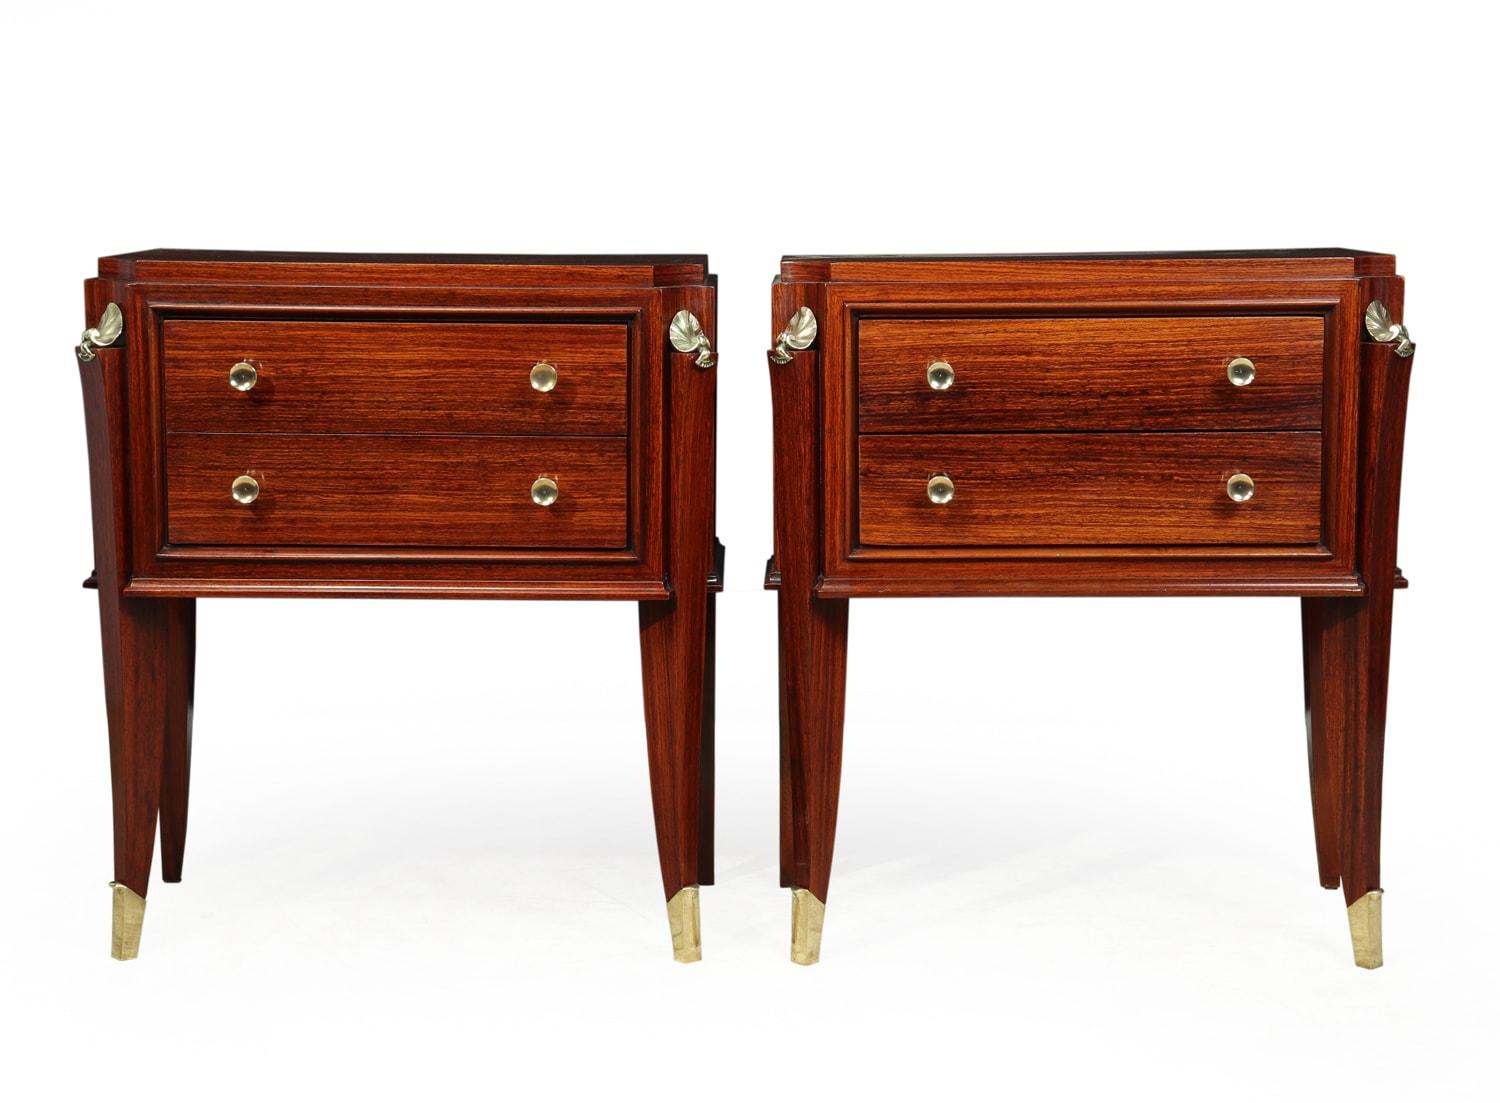 French Art Deco bedside chests
A pair of French two-drawer Art Deco bedside chests, very good quality dovetail joint construction in rosewood with polished brass fittings the chests have been professionally restored and French polished
Age: